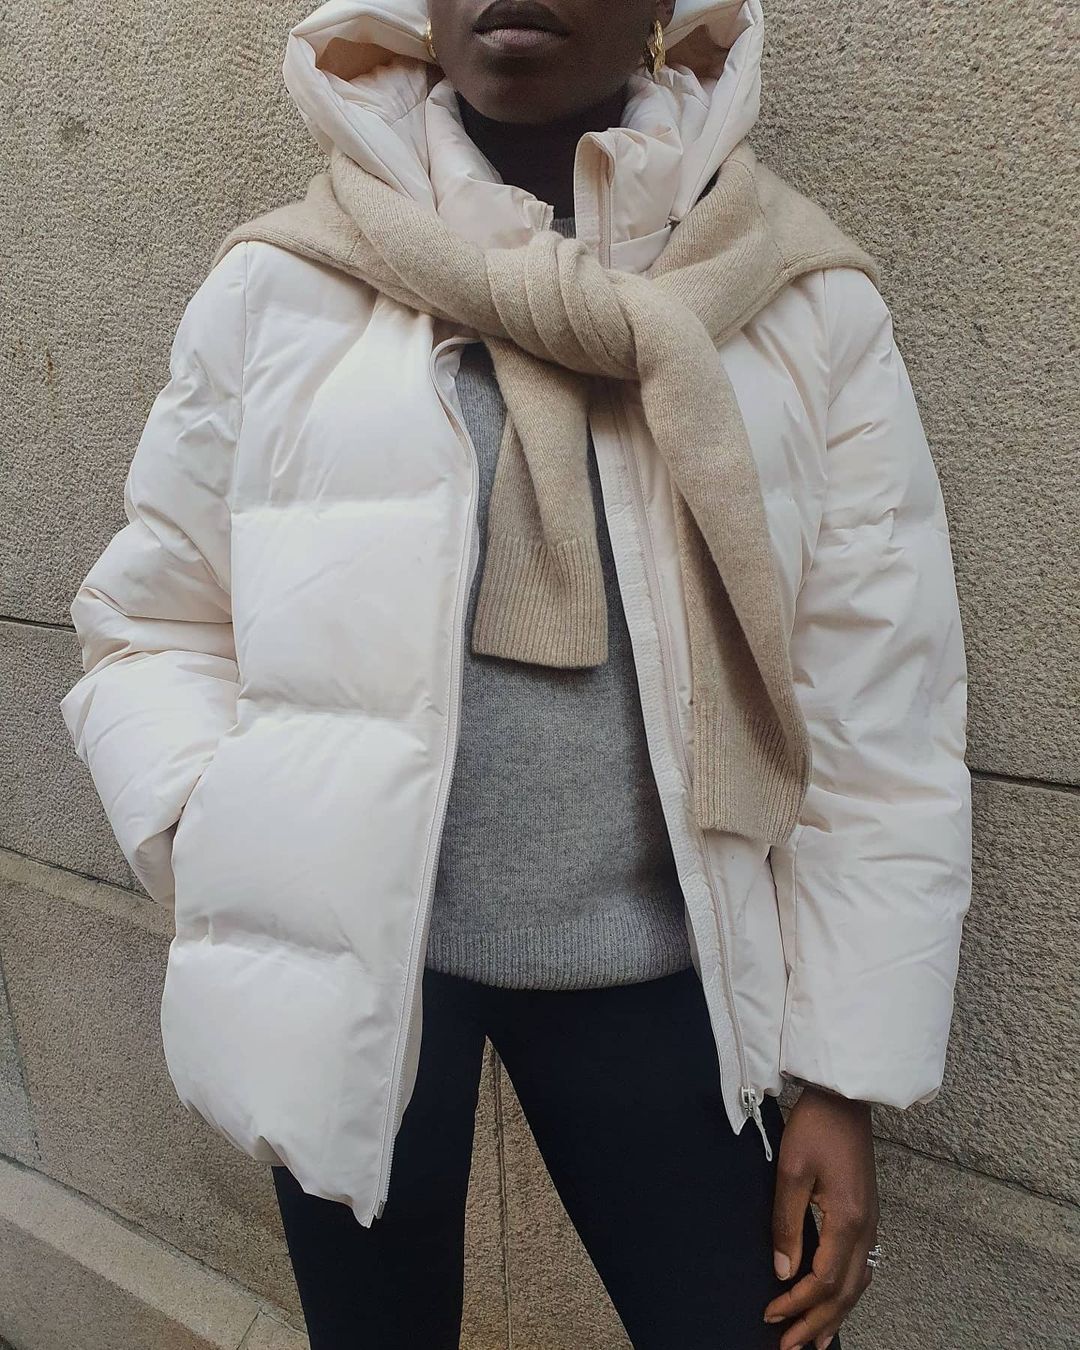 Cozy Winter Neutral Outfit Idea — @chrystelleeriksberger white puffr coat, tan scarf and gray sweater